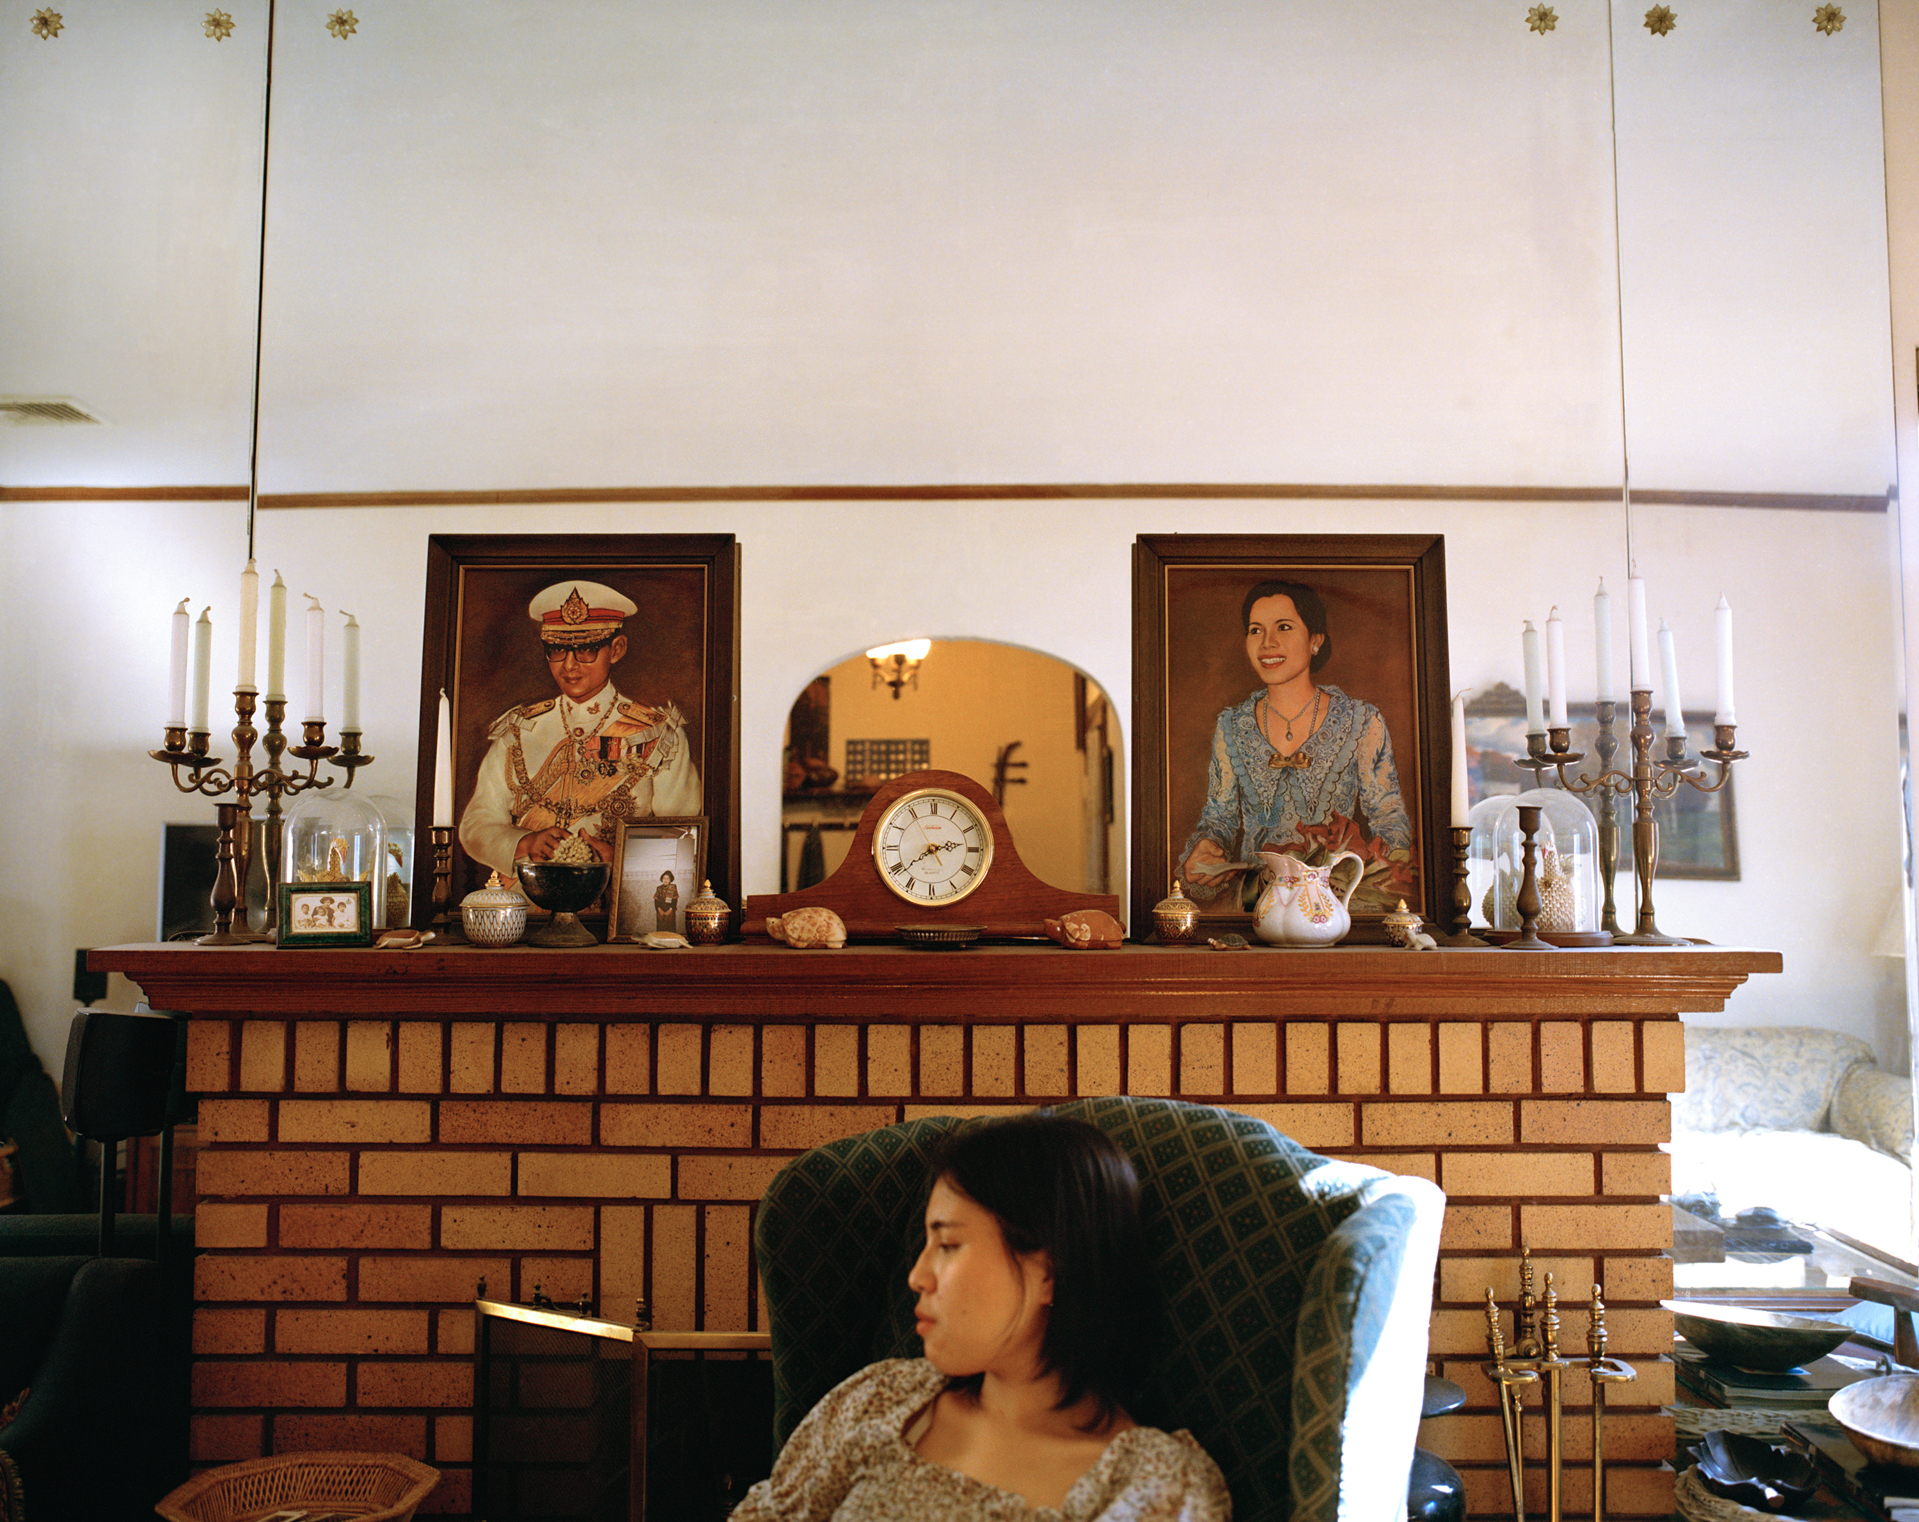 person sitting in front of a mantel with family photos on it